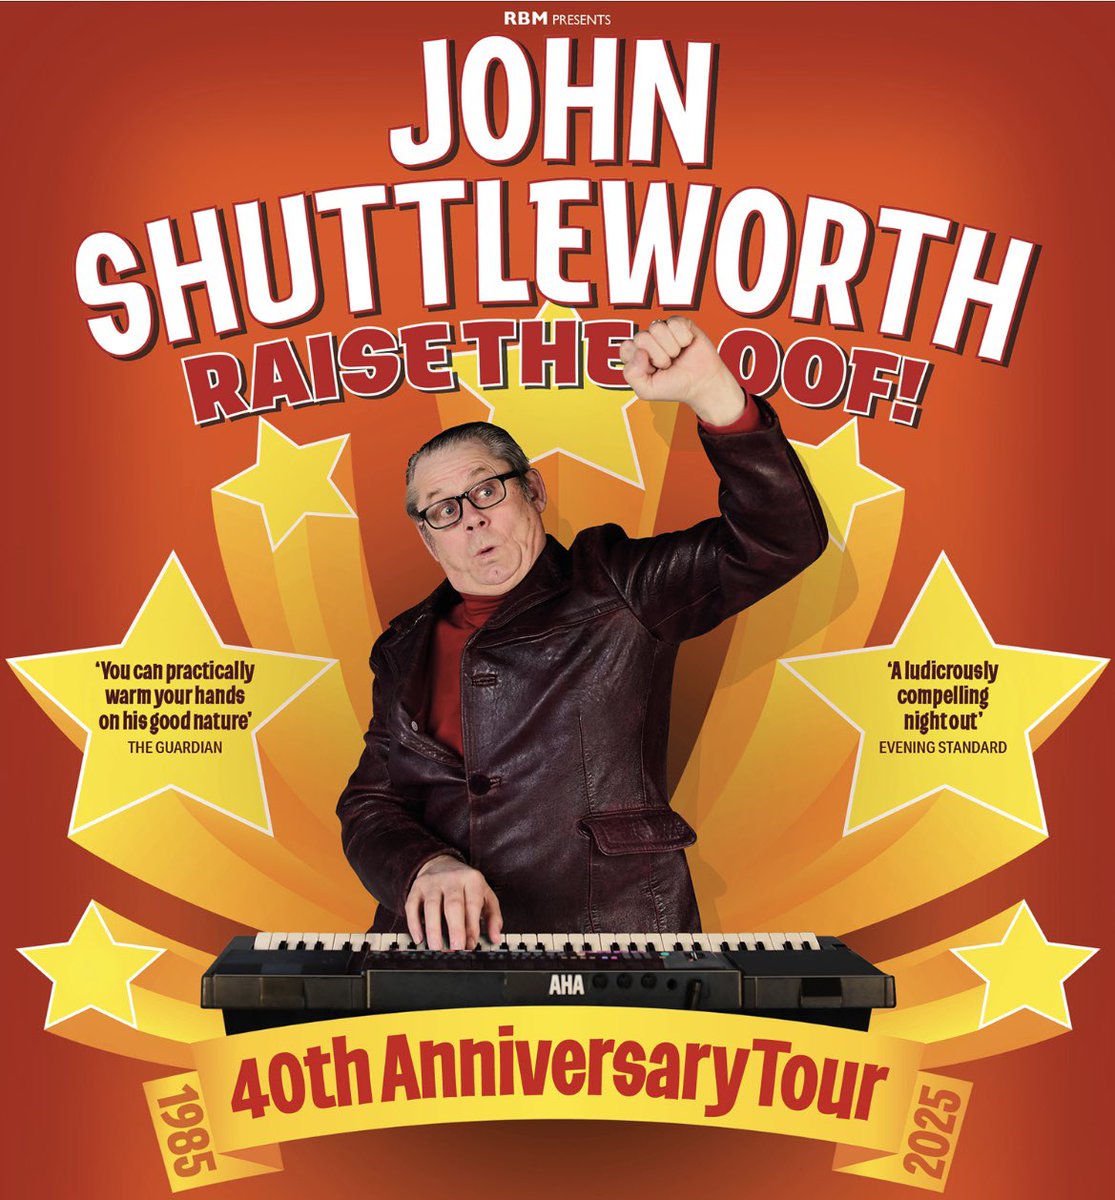 John Shuttleworth (@johnshuttlewrth), is back celebrating 40 years in showbiz in Spring 2025! With more hilarious stories and songs performed on his trusty Yamaha organ this is one comedian you shouldn't miss. On Sale Now: yvonne-arnaud.co.uk/whats-on/john-…